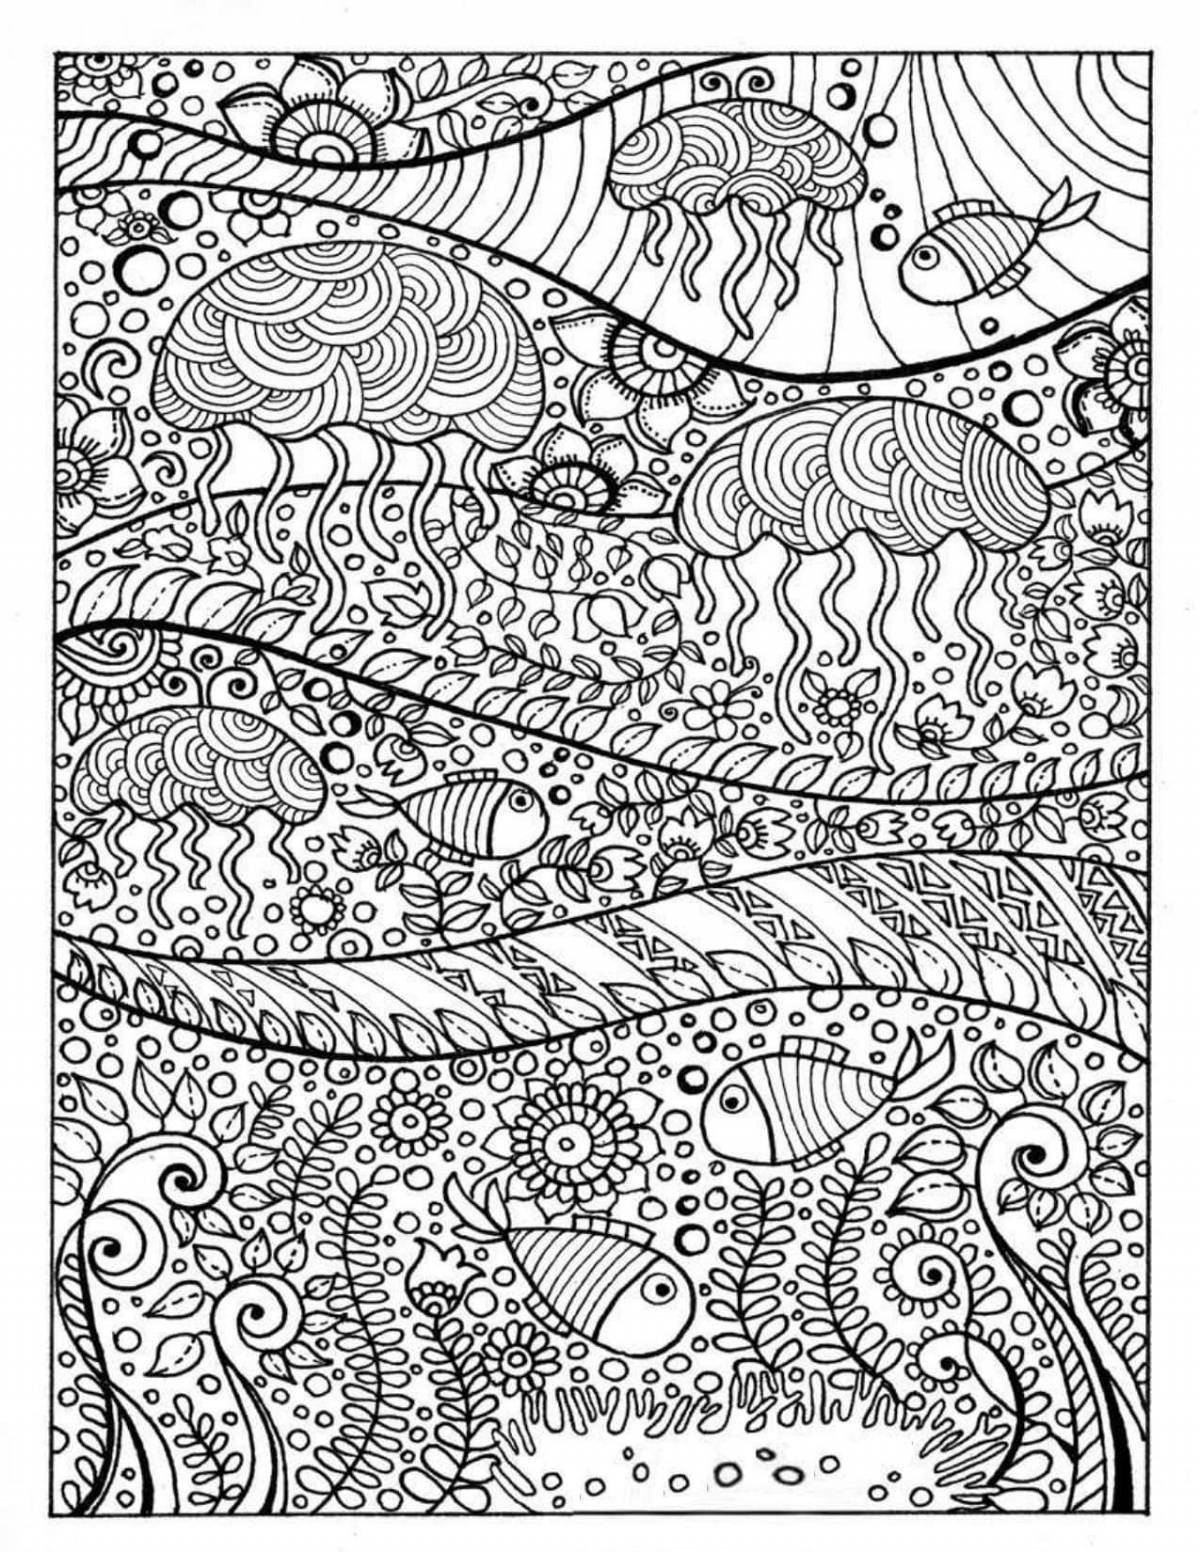 Invigorating coloring art therapy for adults